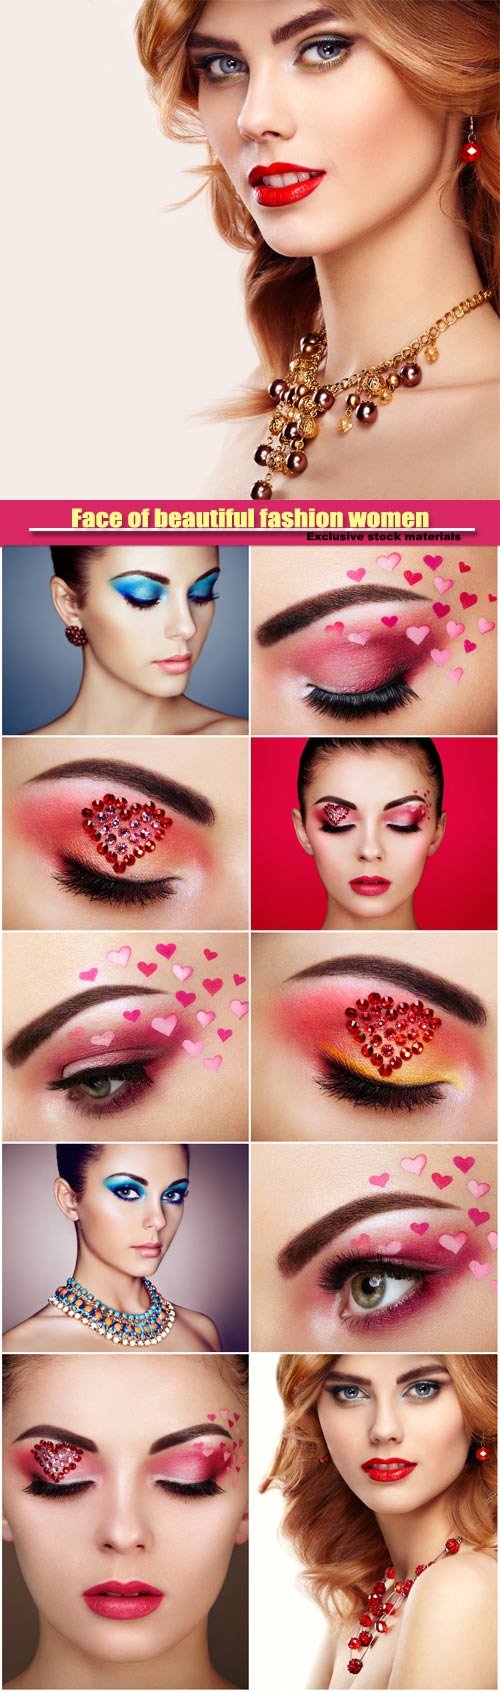 Face of beautiful fashion women with holiday makeup heart